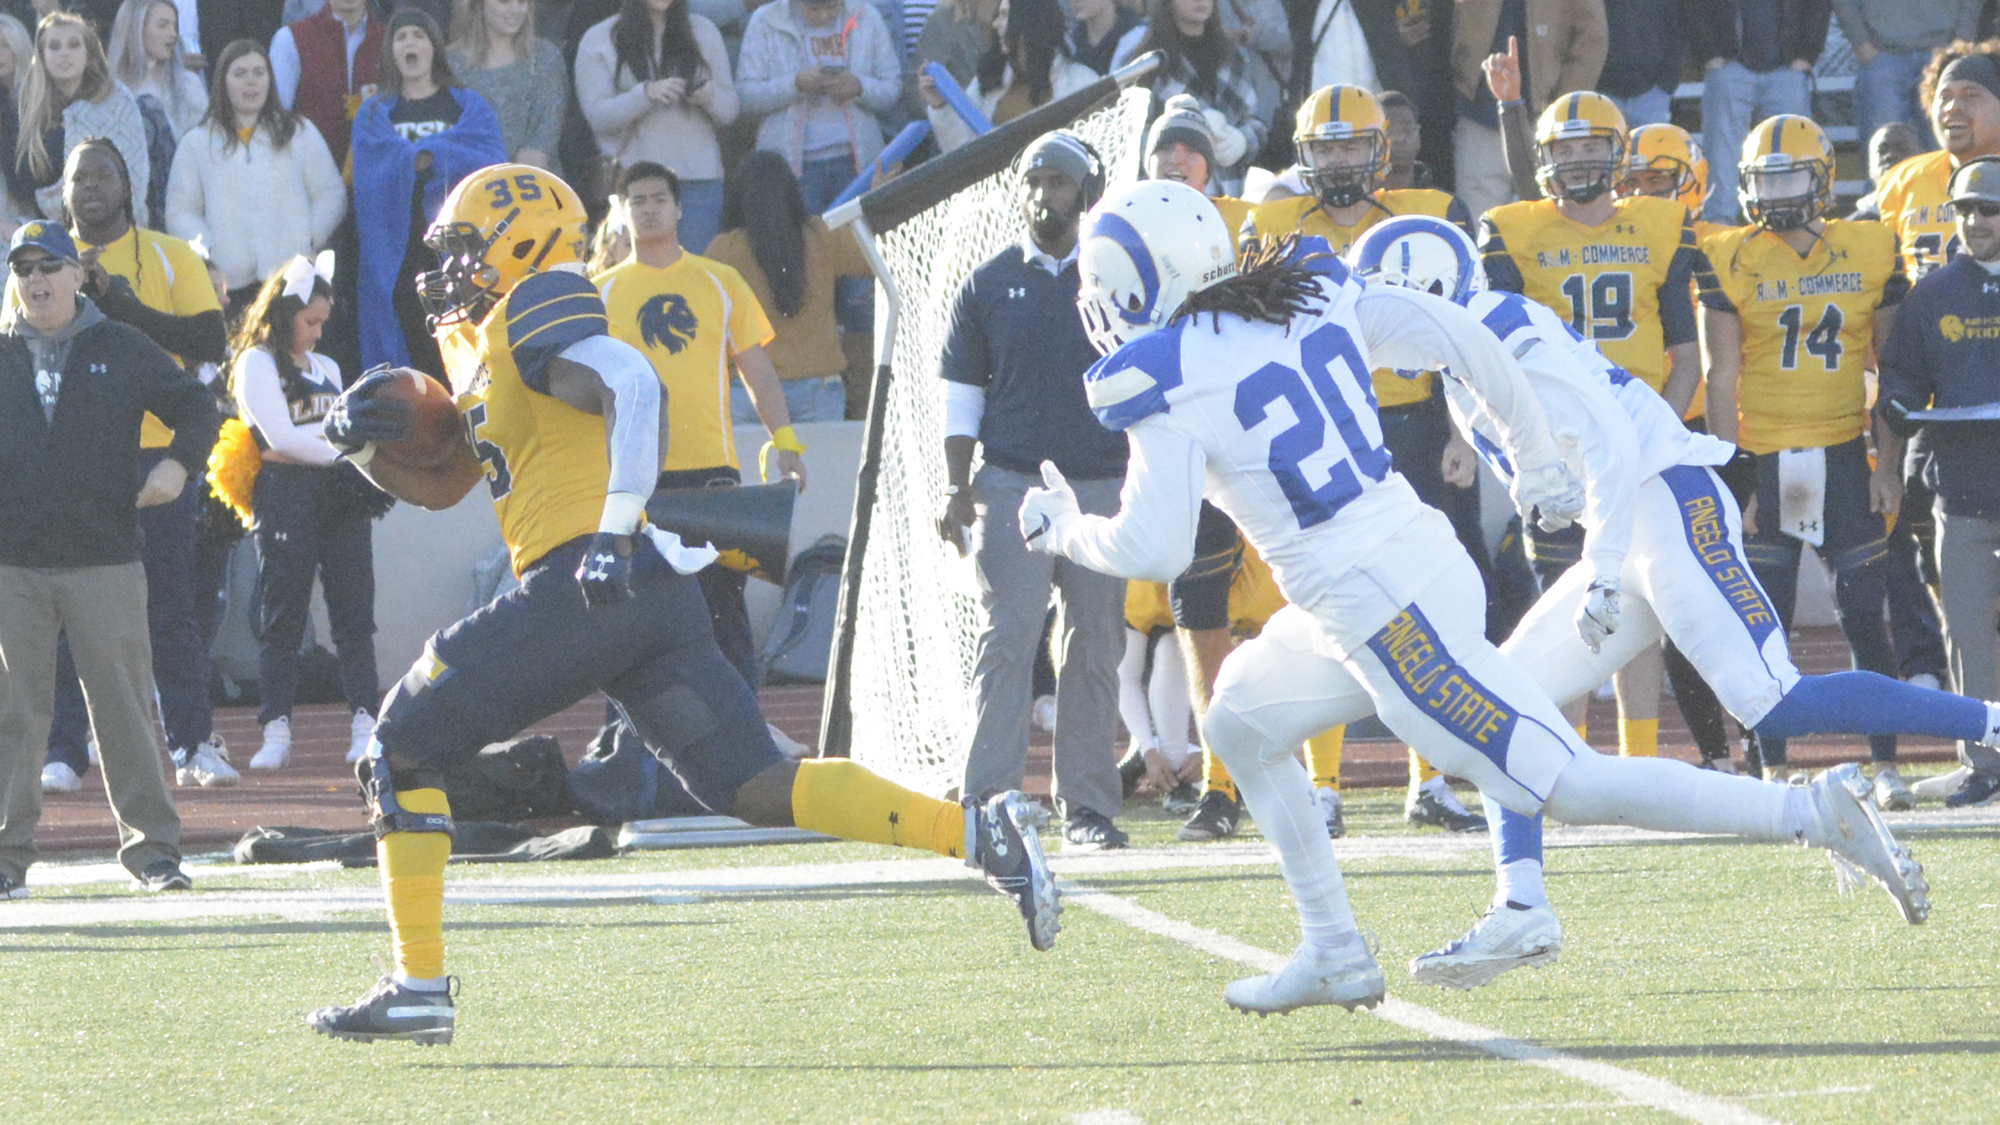 No. 14 Texas A&M Commerce Lions Football Team Closes Regular Season With 41-13 Win Over Angelo State. Qualifies for Playoffs for Fourth Consecutive Season